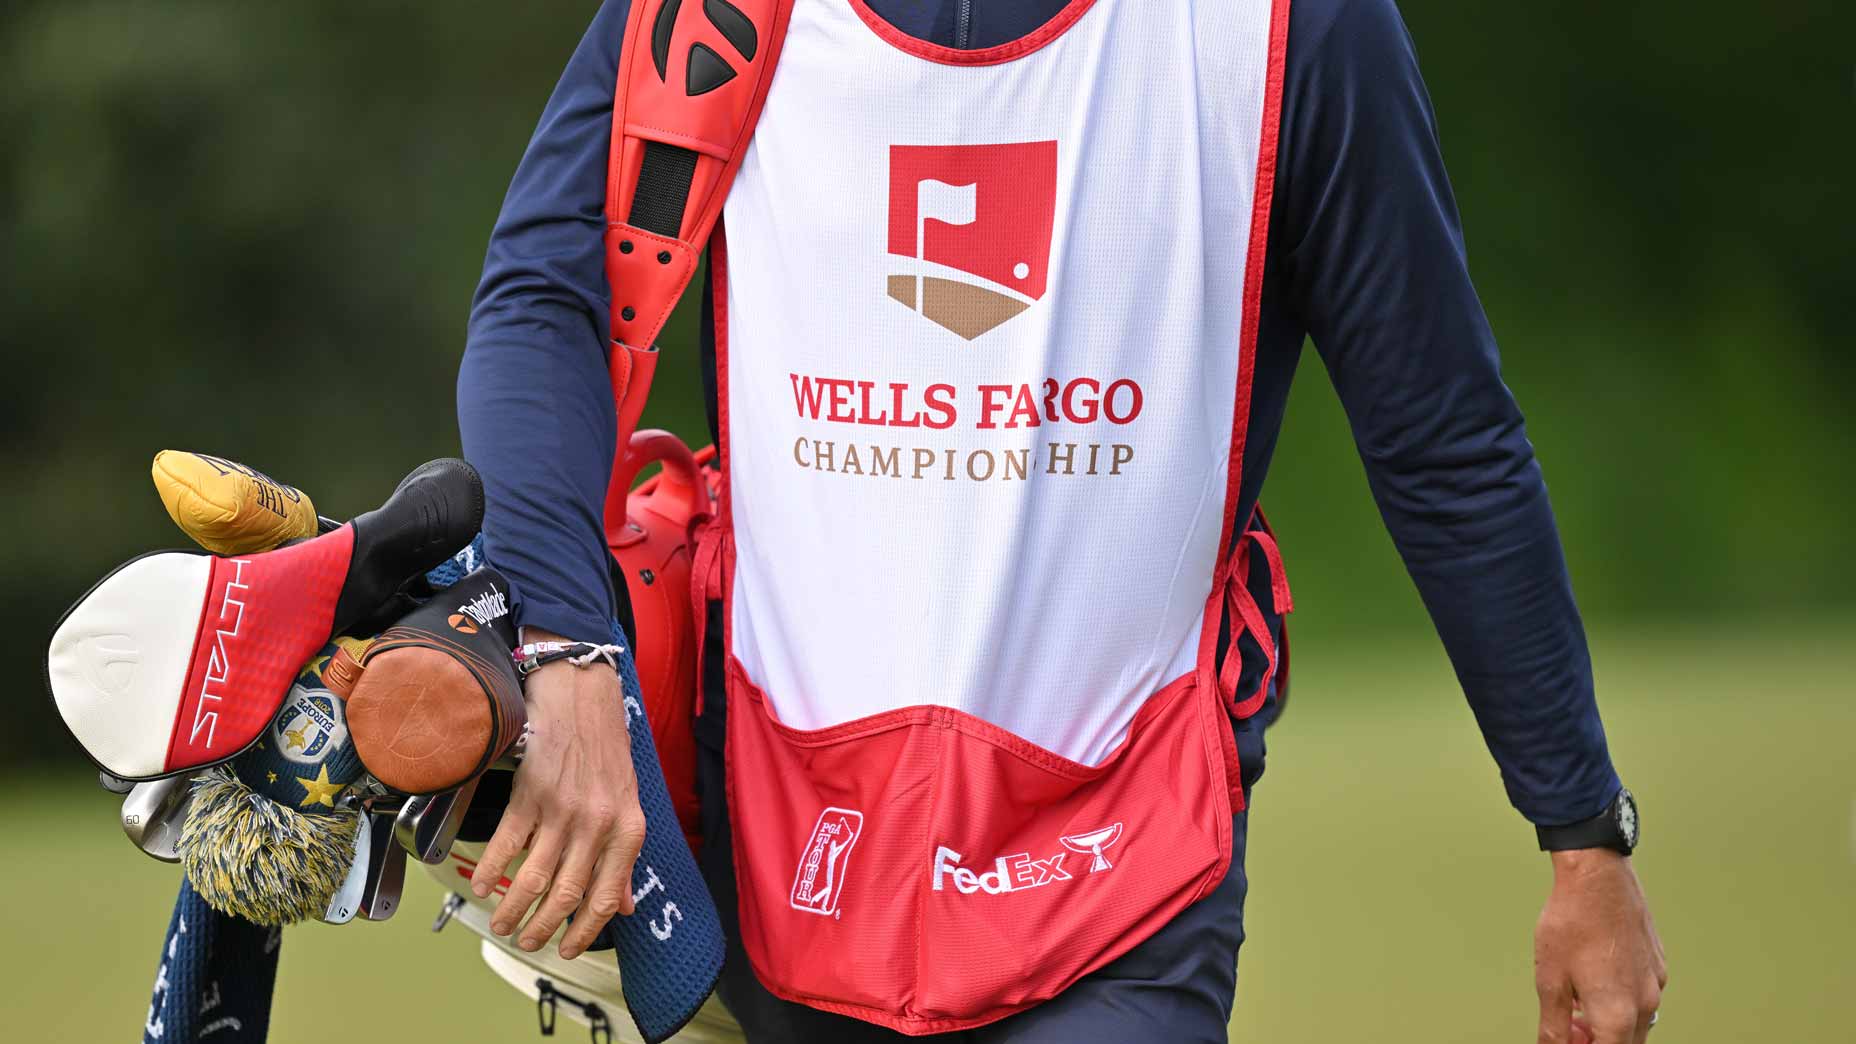 A close-up of a caddie's bib at the Wells Fargo Championship